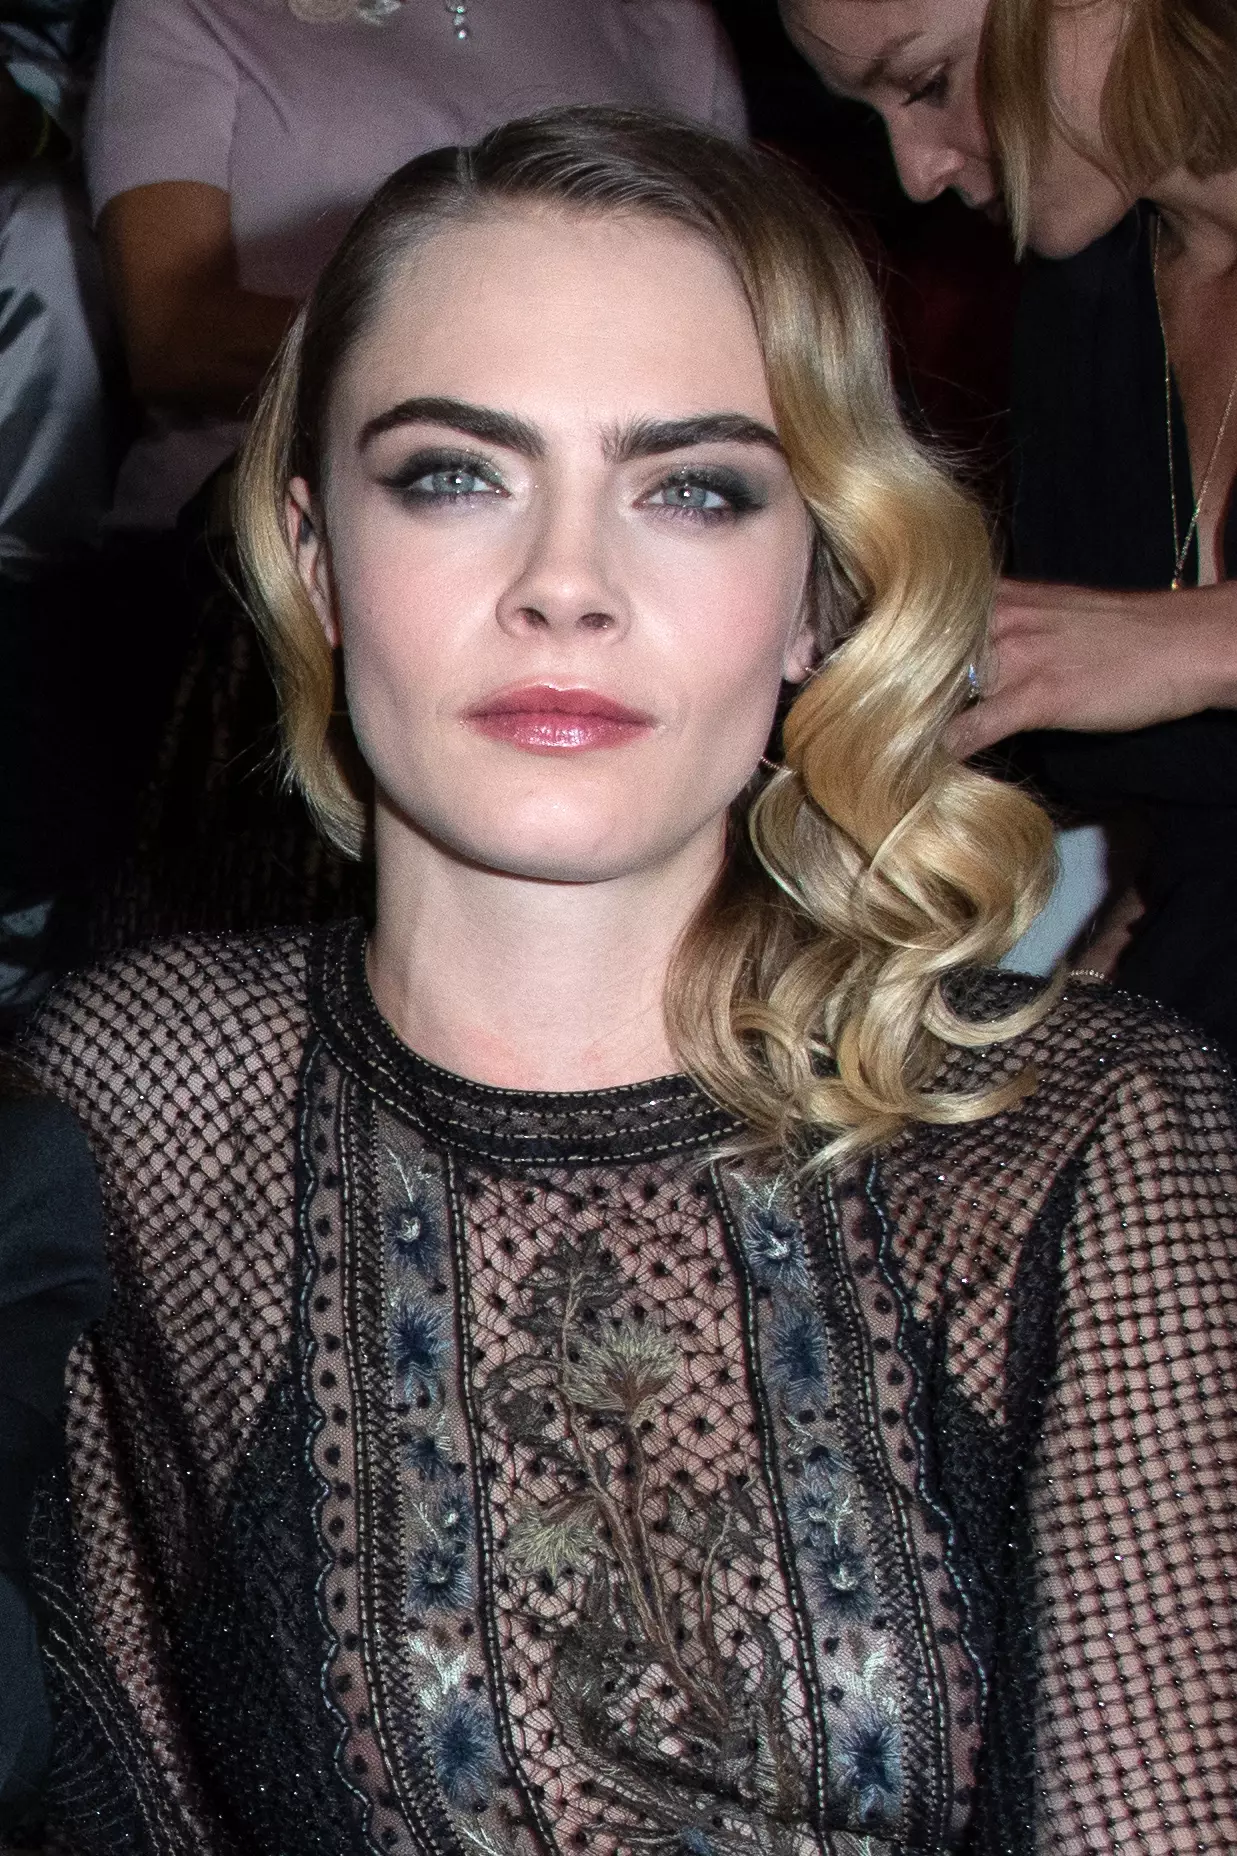 Cara Delevingne has said Harvey Weinstein told her to lie about her sexuality.